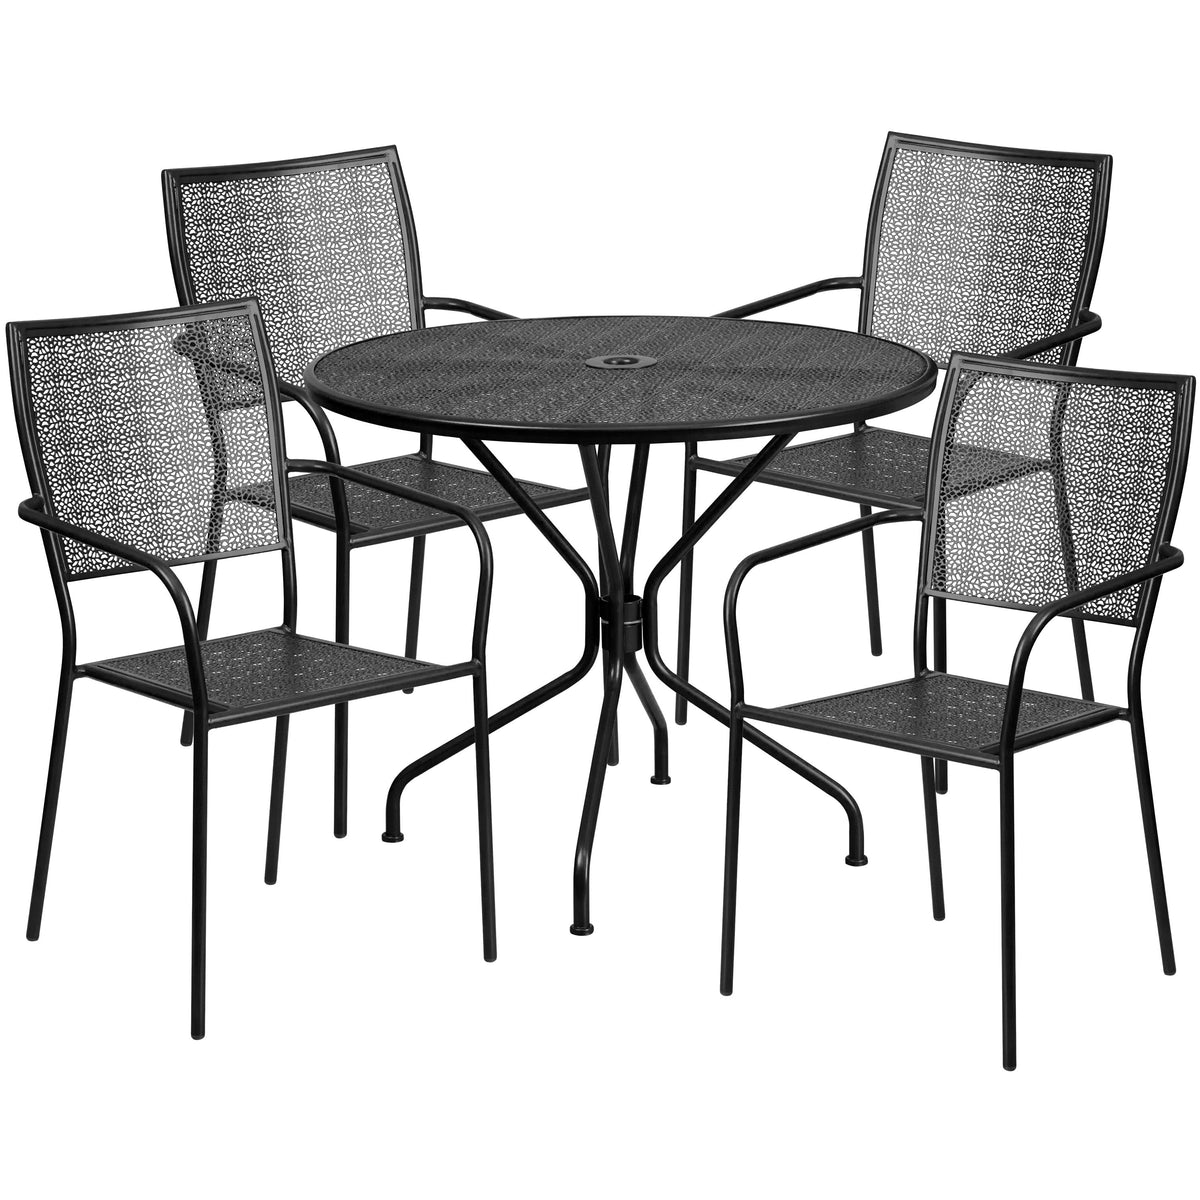 Black |#| 35.25inch Round Black Indoor-Outdoor Steel Patio Table Set w/ 4 Square Back Chairs